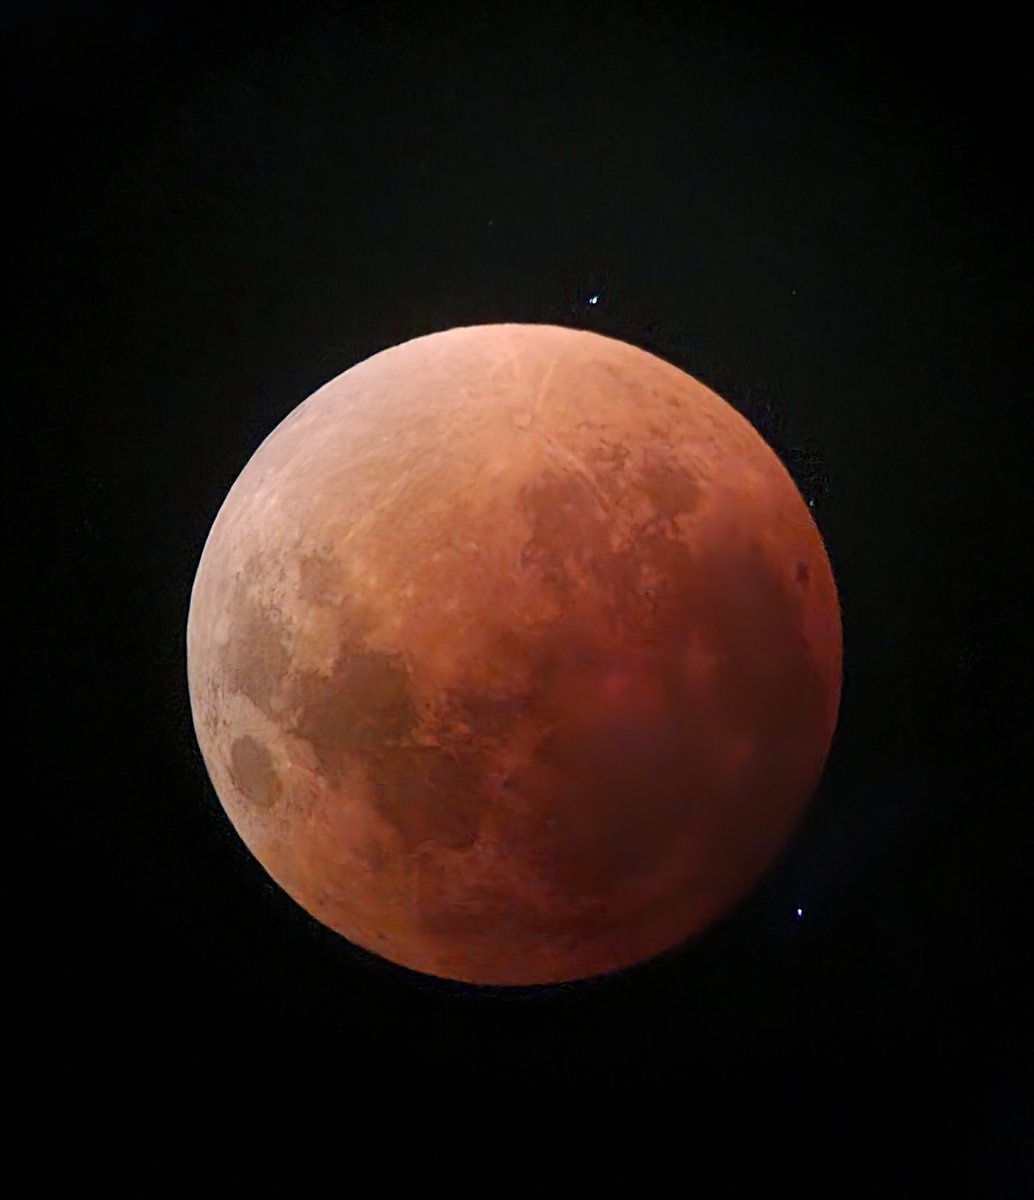 I'm still really proud of this photo of the lunar eclipse.